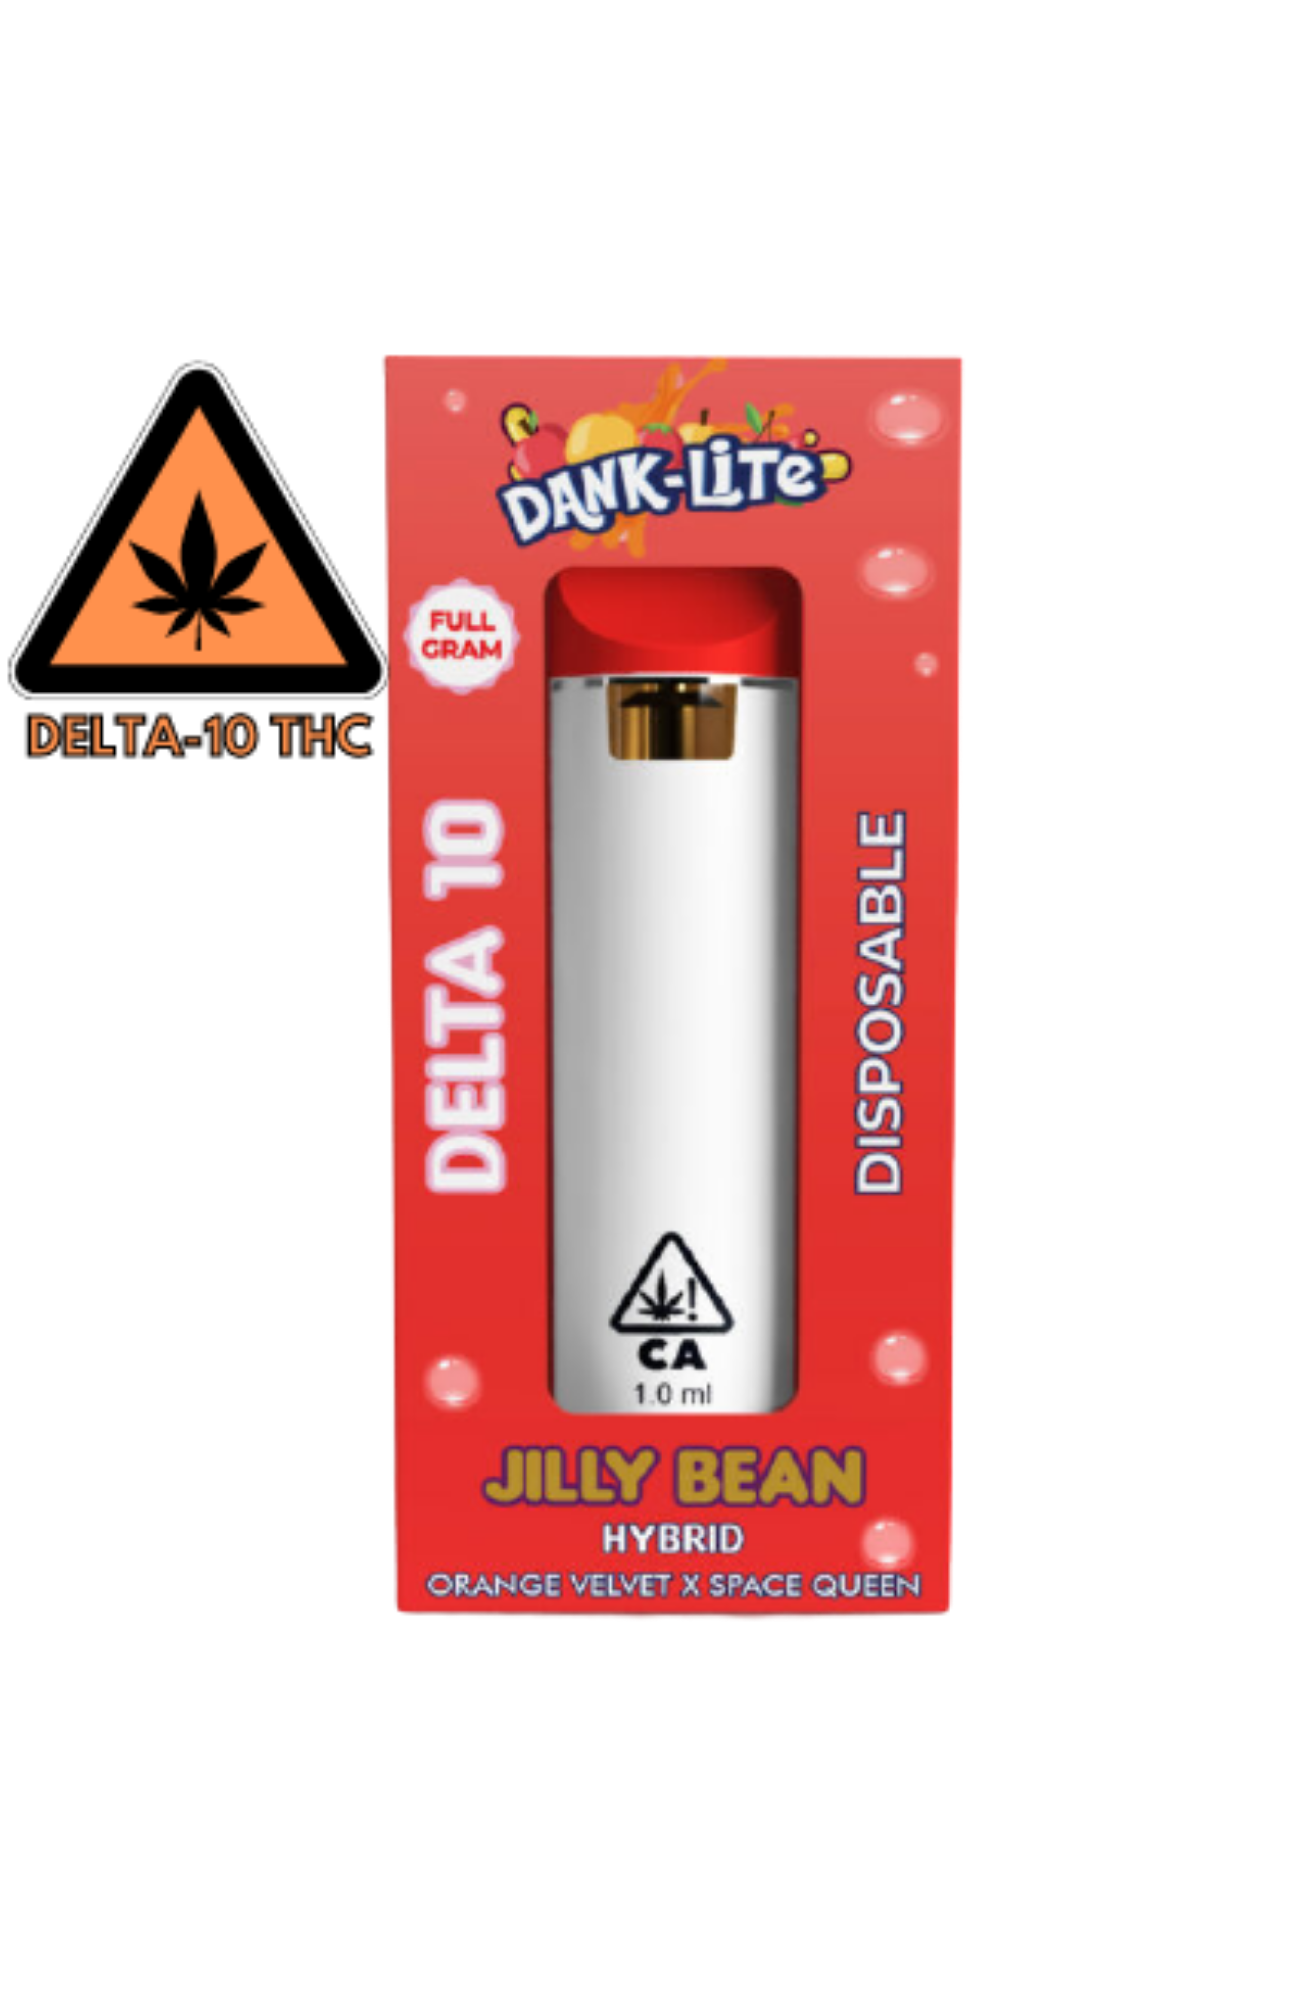 Rare Delta 10 Disposable Vape How To Use - Thc|Delta|Products|Delta-10|Effects|Cbd|Cannabis|Cannabinoids|Cannabinoid|Hemp|Oil|Body|Benefits|Pain|Drug|Inflammation|People|Receptors|Gummies|Arthritis|Market|Product|Marijuana|Delta-8|Research|States|Cb1|Test|Strains|Effect|Vape|Experience|Users|Time|Compound|System|Way|Anxiety|Plants|Chemical|Delta-10 Thc|Delta-9 Thc|Cbd Oil|Drug Test|Delta-10 Products|Side Effects|Delta-8 Thc|Cb1 Receptors|Cb2 Receptors|Cannabis Plants|Endocannabinoid System|Minor Discomfort|Medical Marijuana|Thc Products|Psychoactive Effects|Arthritic Symptoms|New Cannabinoid|Fusion Farms|Arthritic Patients|Conclusion Delta|Medical Cannabis Oil|Arthritis Pain|Good Fit|Double Bond|Anticonvulsant Actions|Medical Benefit|Anticonvulsant Properties|Epileptic Children|User Guide|Farm Bill